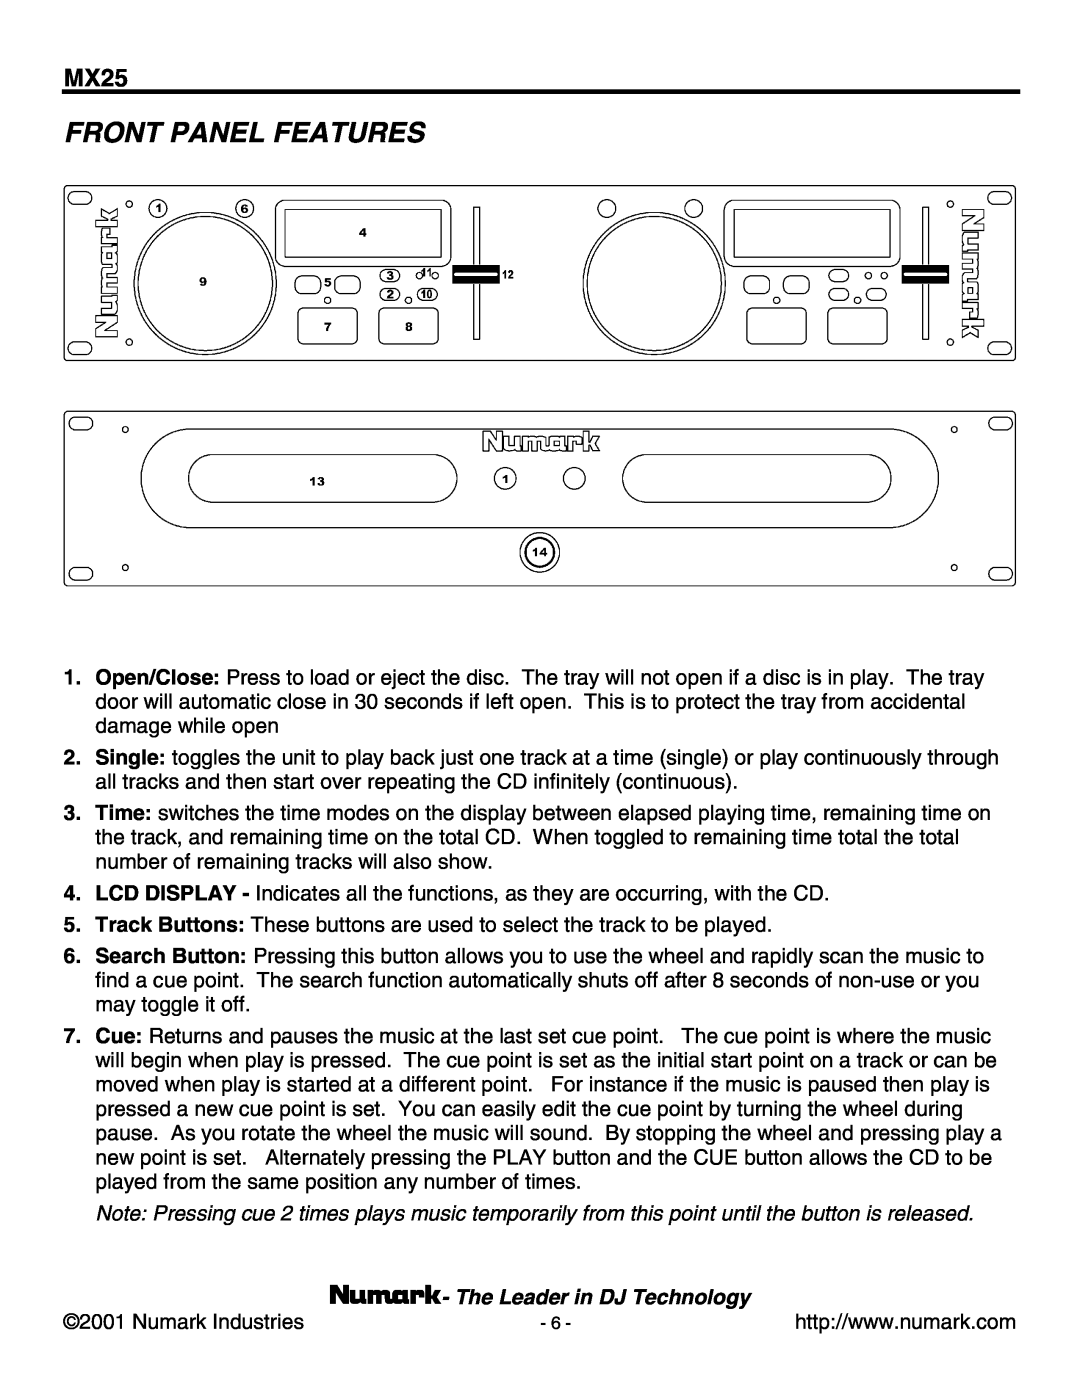 Numark Industries MX25 manual Front Panel Features, The Leader in DJ Technology 